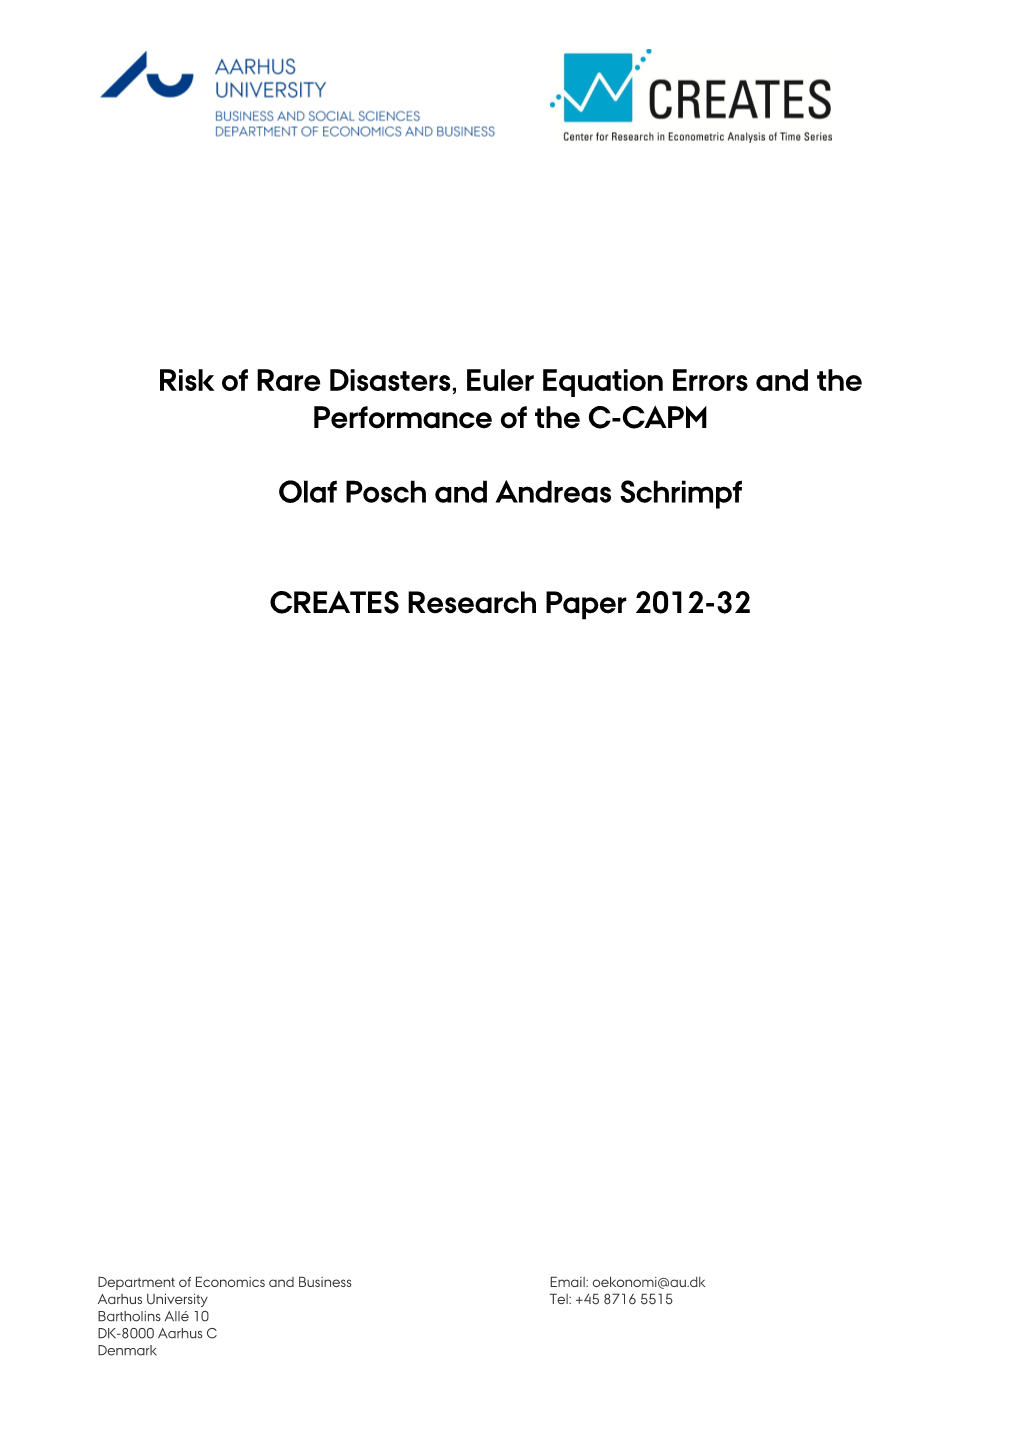 Risk of Rare Disasters, Euler Equation Errors and the Performance of the C-CAPM